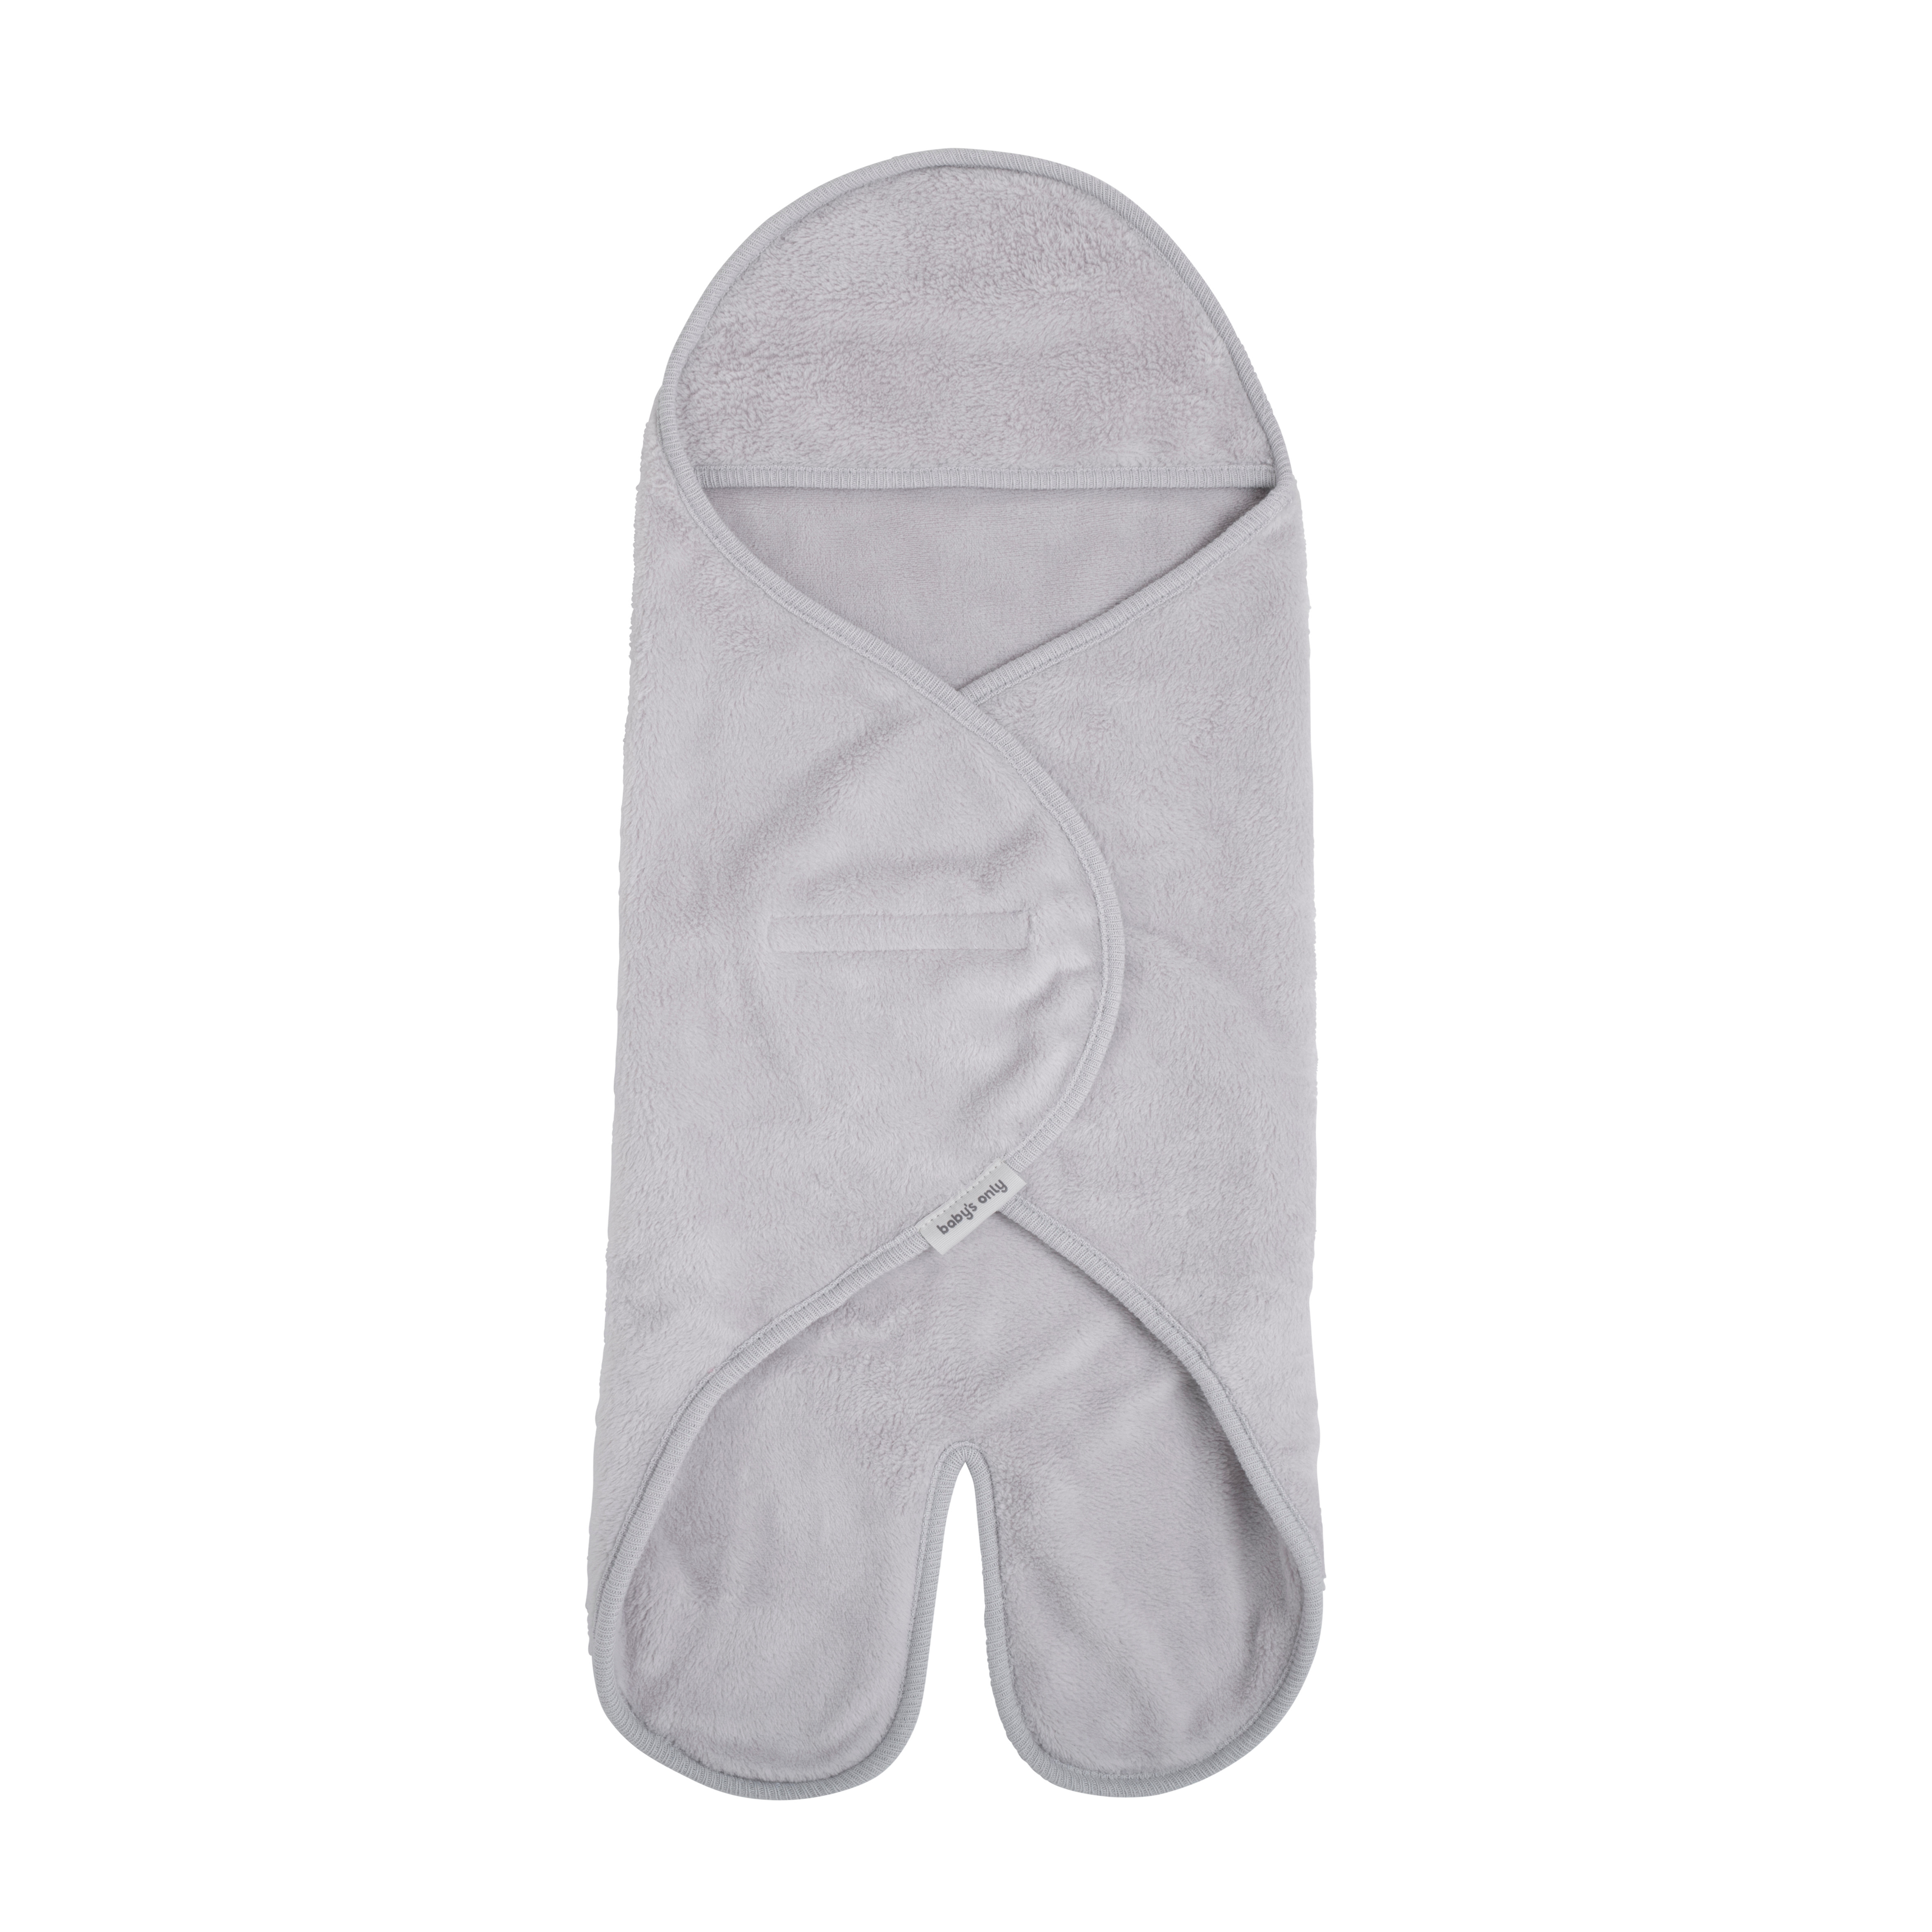 Hooded baby blanket with feet Cozy dusty grey